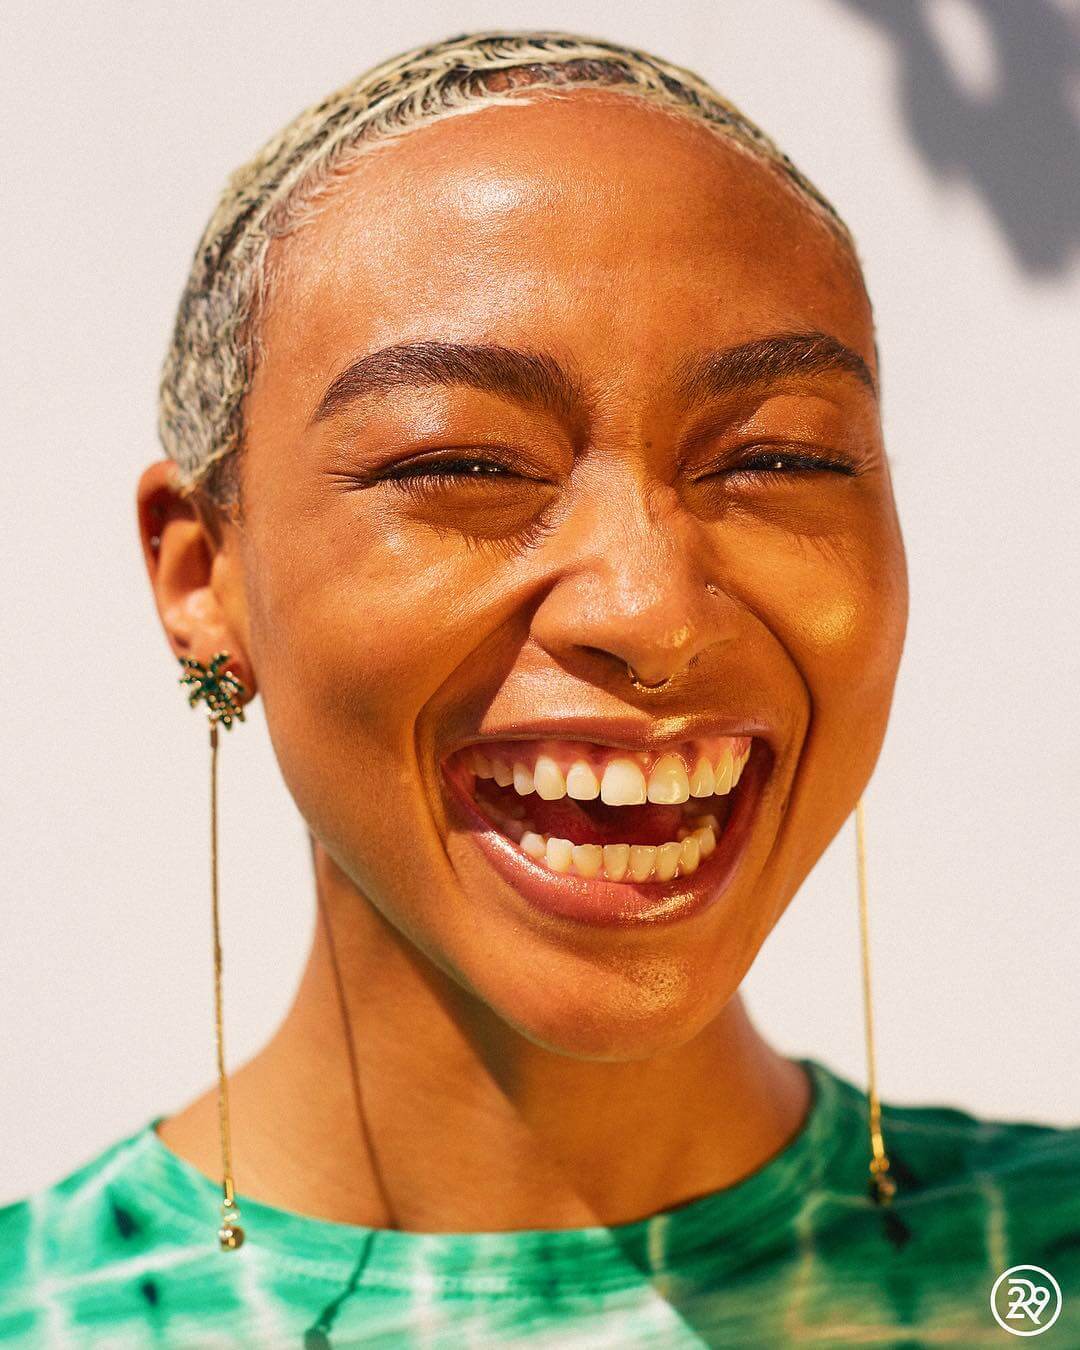 Tati Gabrielle Wiki/Biography, Net Worth, Husband Age, Height, Parents,  Ethnicity and Nationality